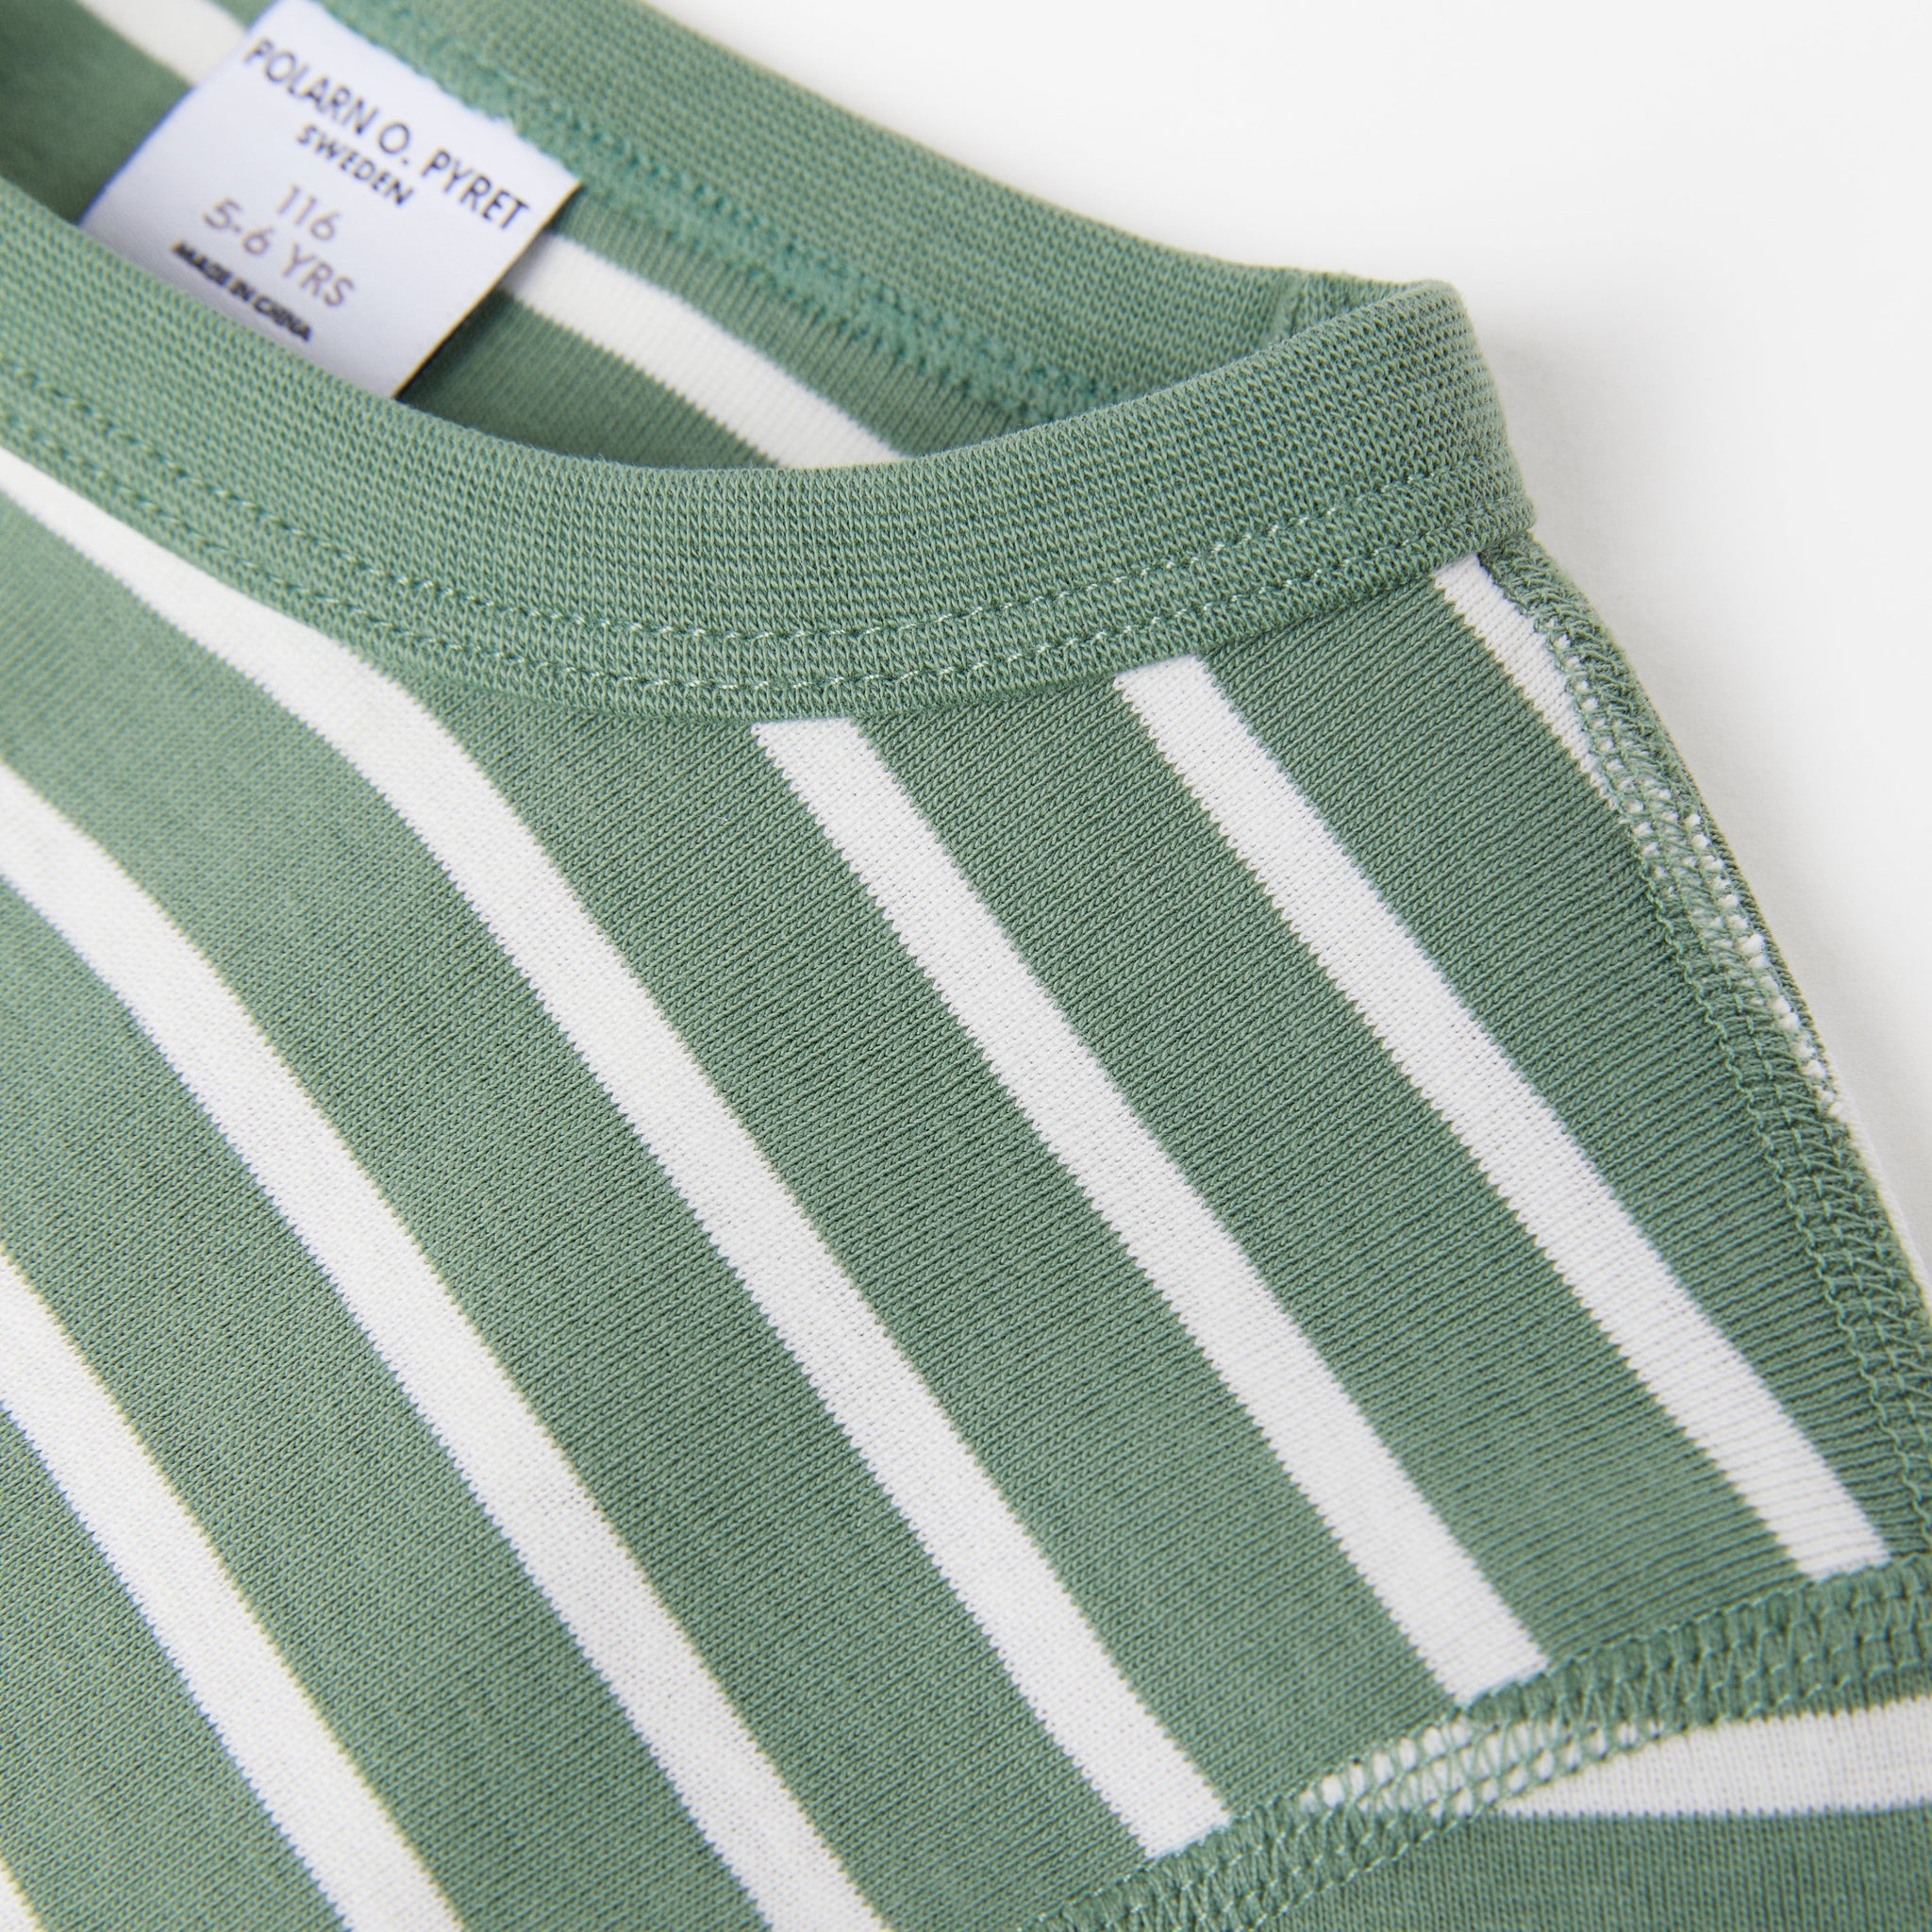 Organic Cotton Striped Green Kids Top from the Polarn O. Pyret Kidswear collection. Nordic kids clothes made from sustainable sources.